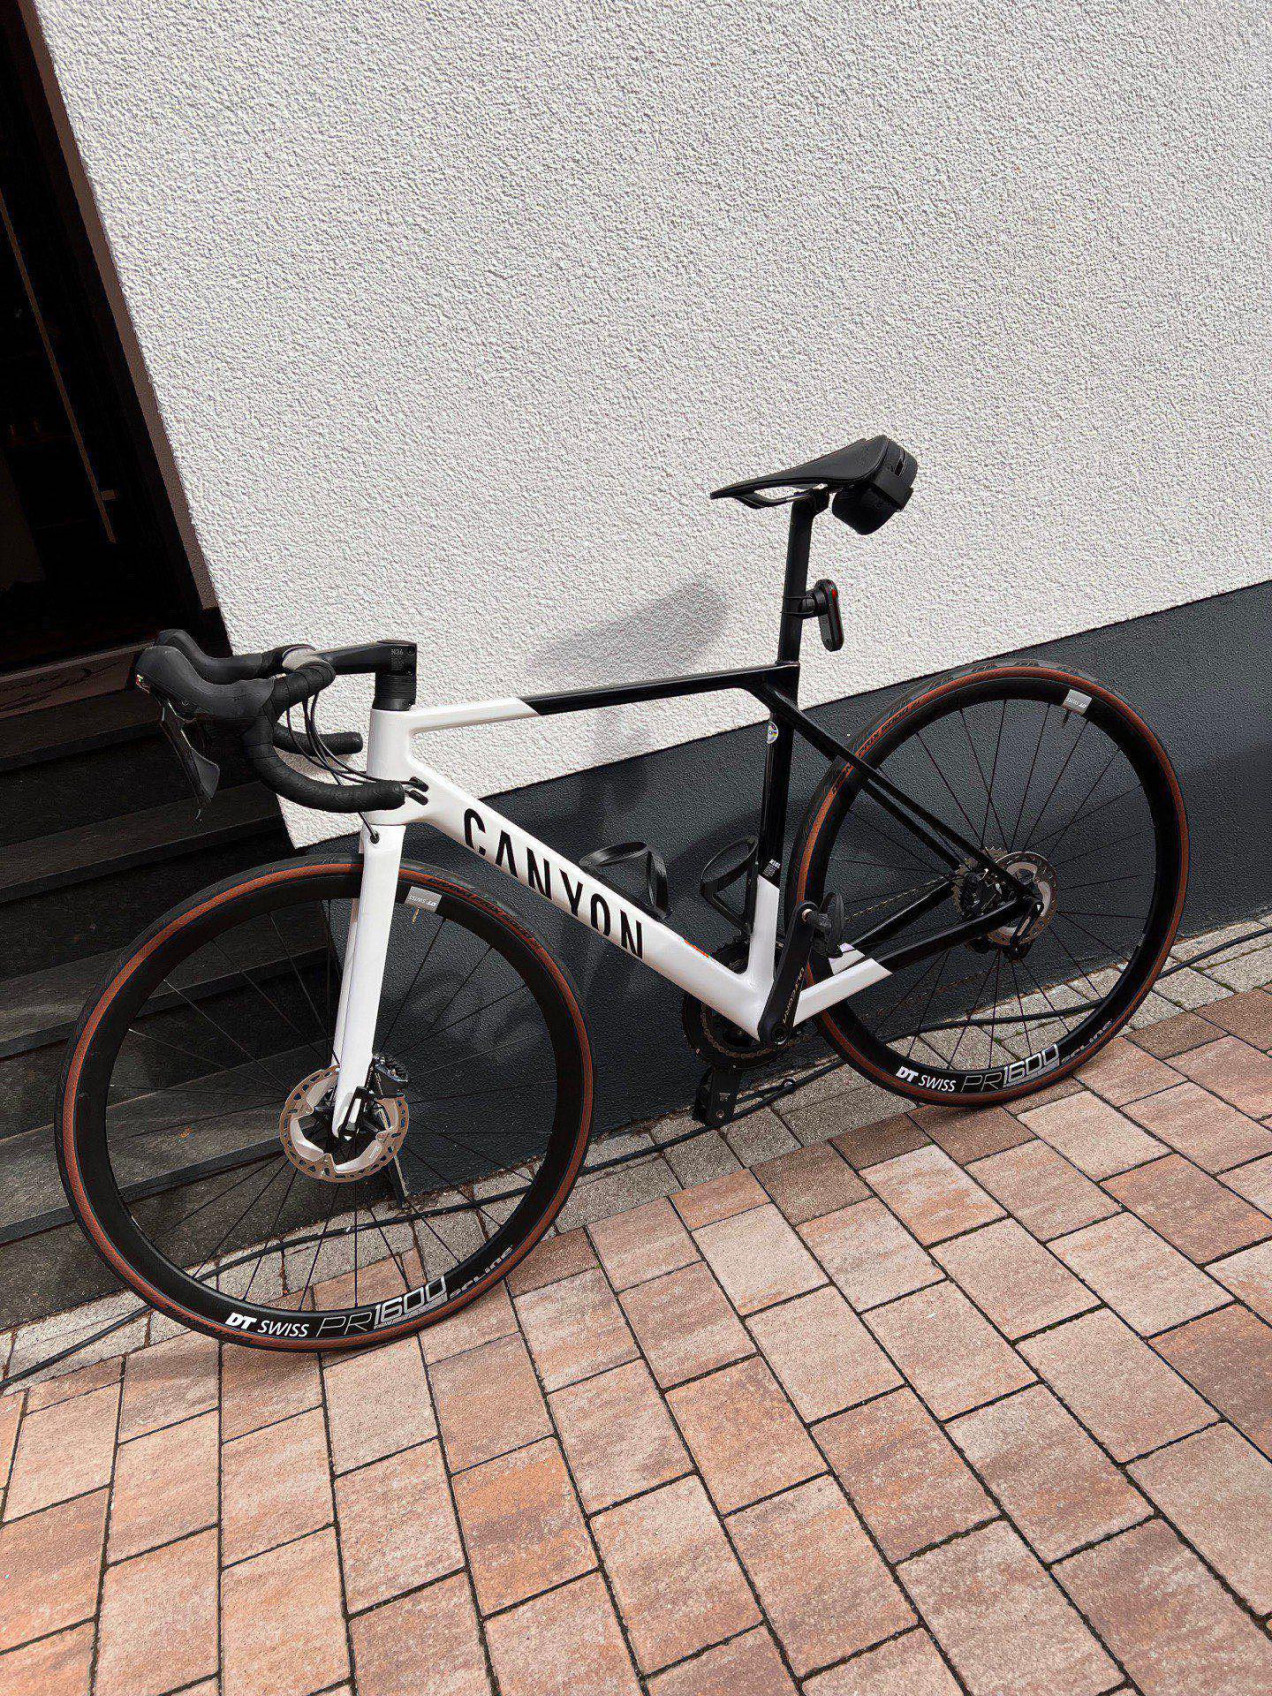 Canyon Ultimate CF SL 8 used in m | buycycle